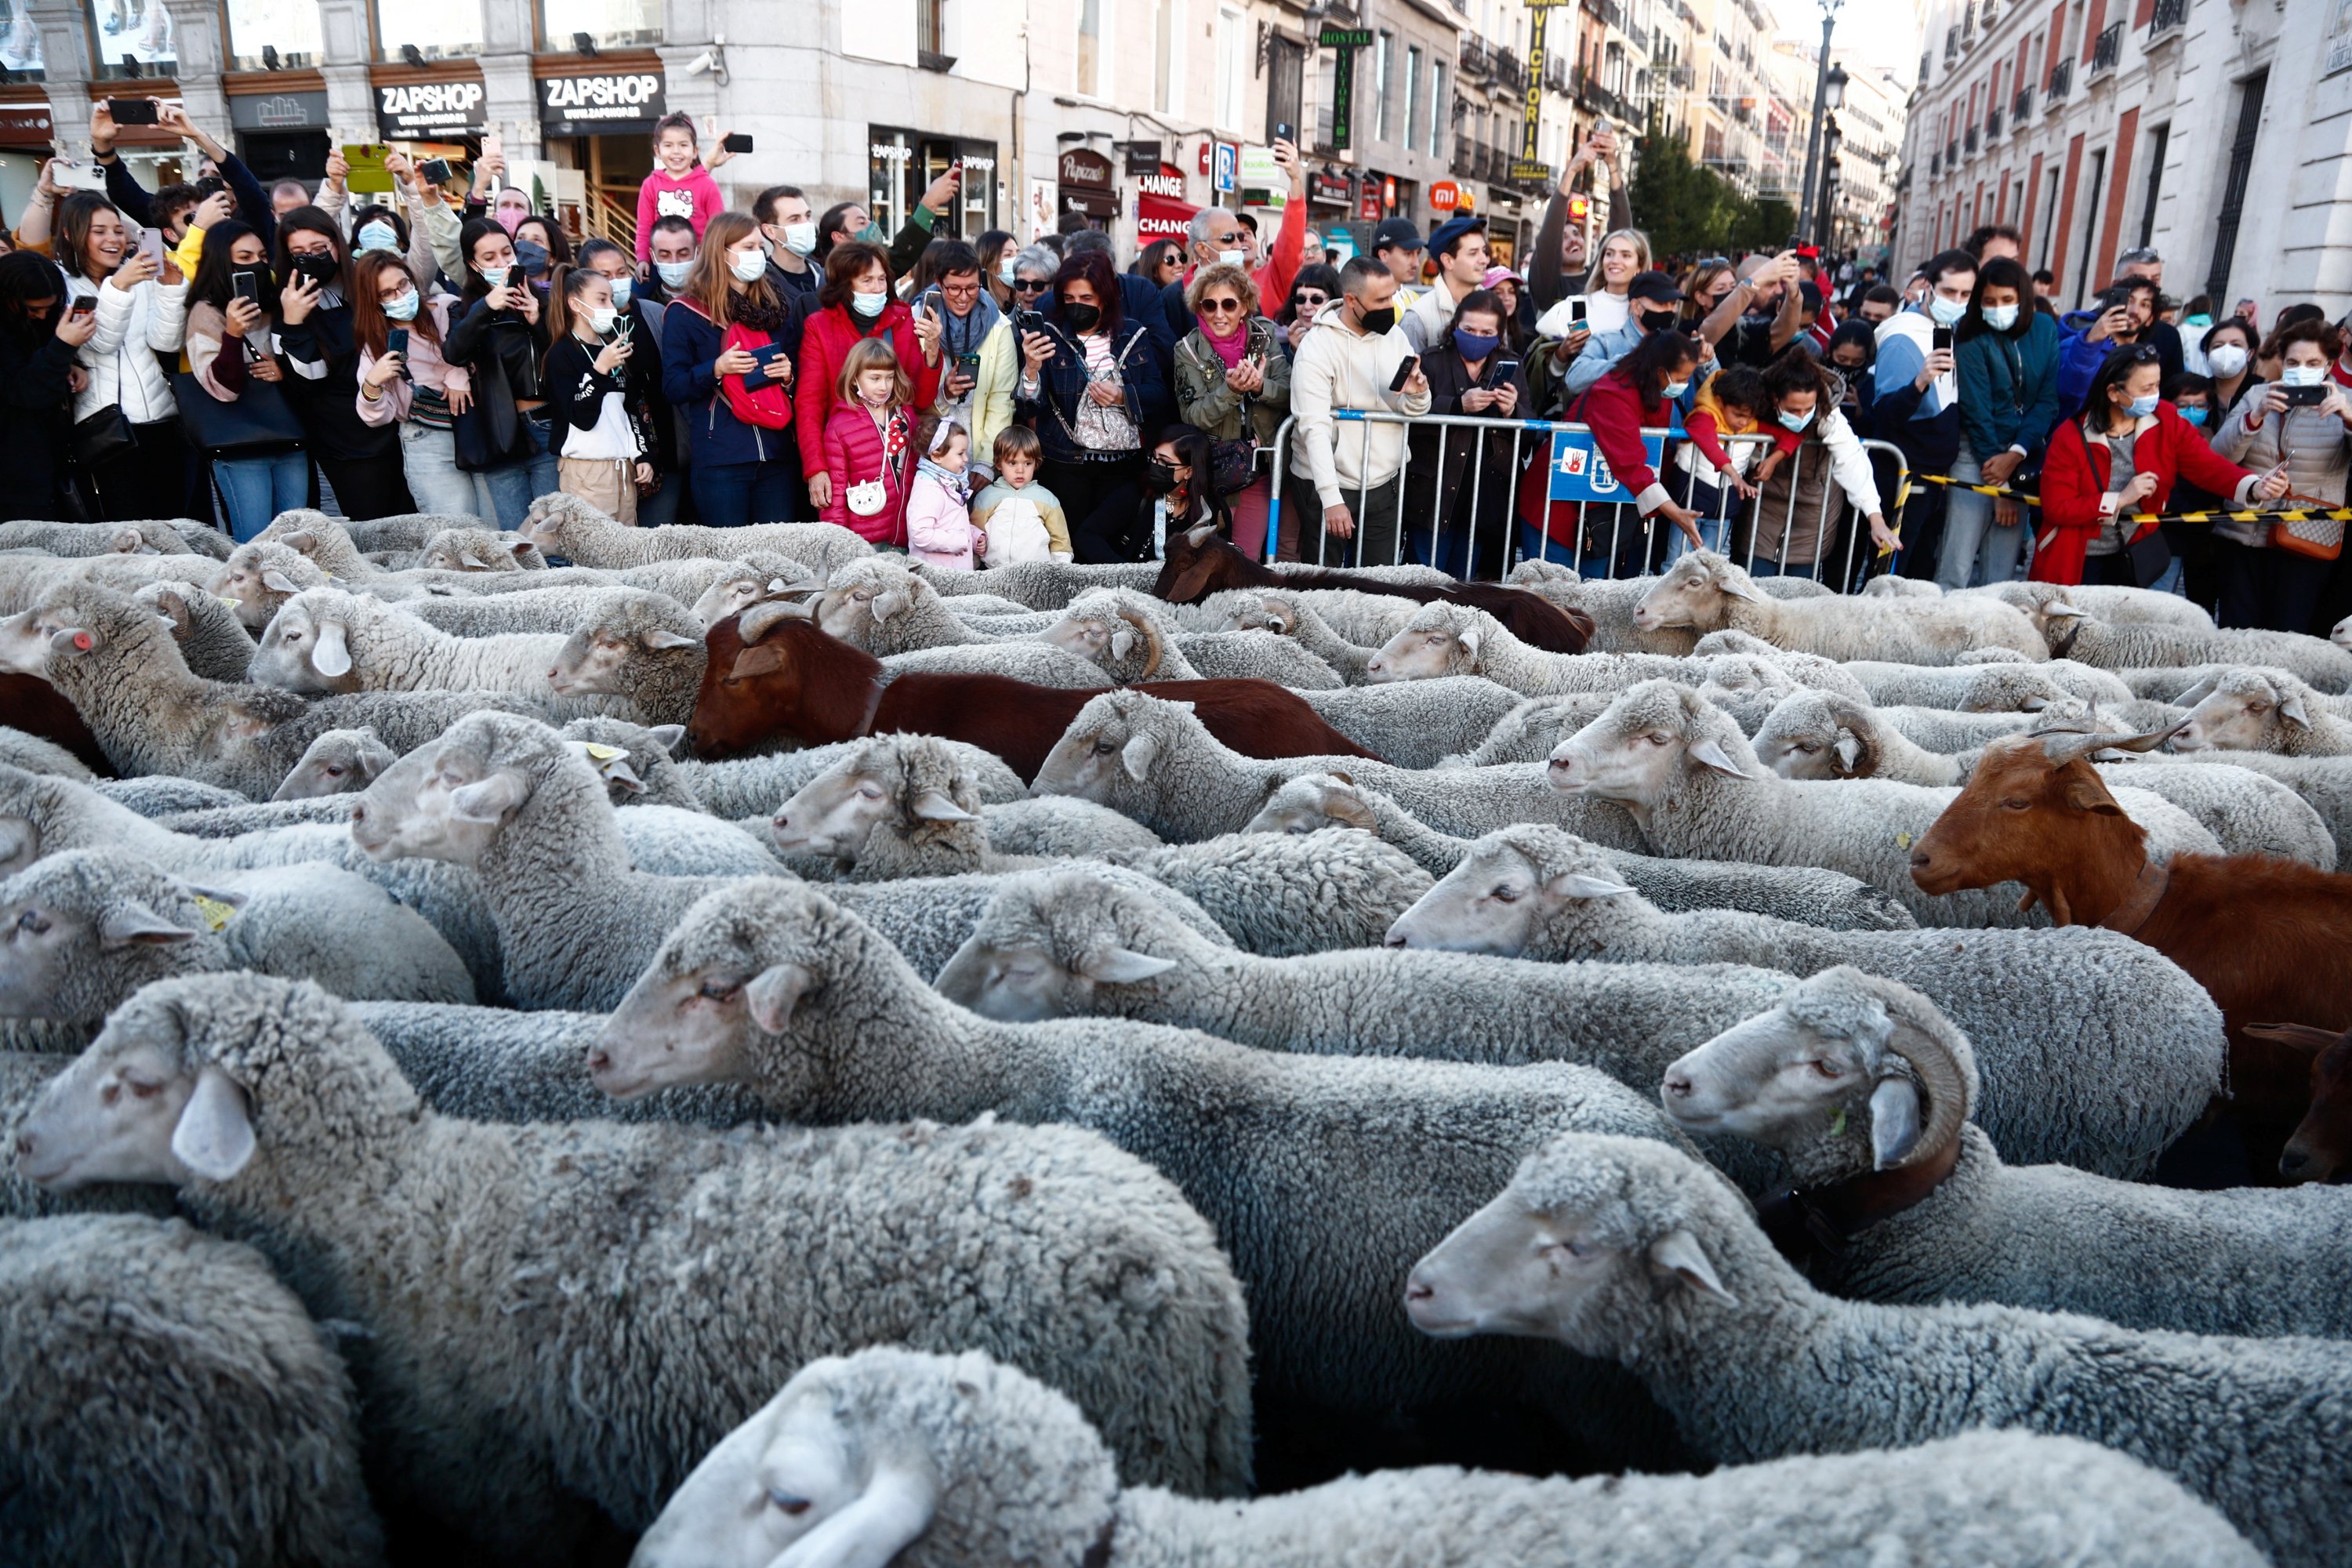 People watch a flock of sheep during the annual parade on the streets of Madrid, as shepherds demand to exercise their right to use traditional migration routes for their livestock from northern Spain to winter grazing pasture land in southern Spain, Oct. 24, 2021. (Reuters Photo)